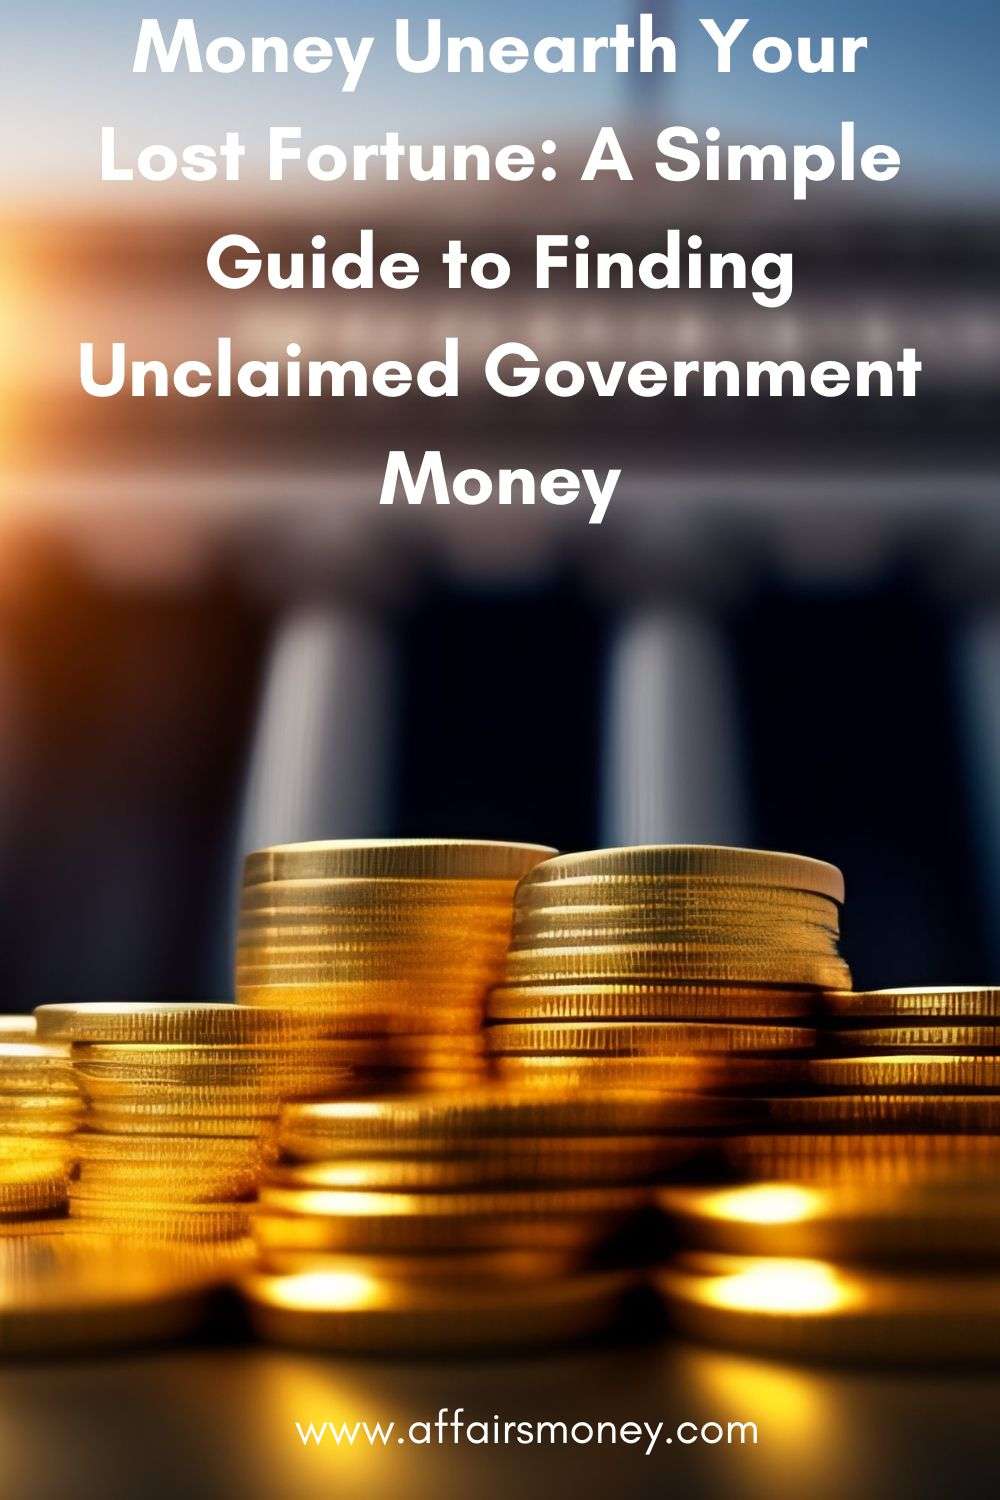 Unclaimed Government Money